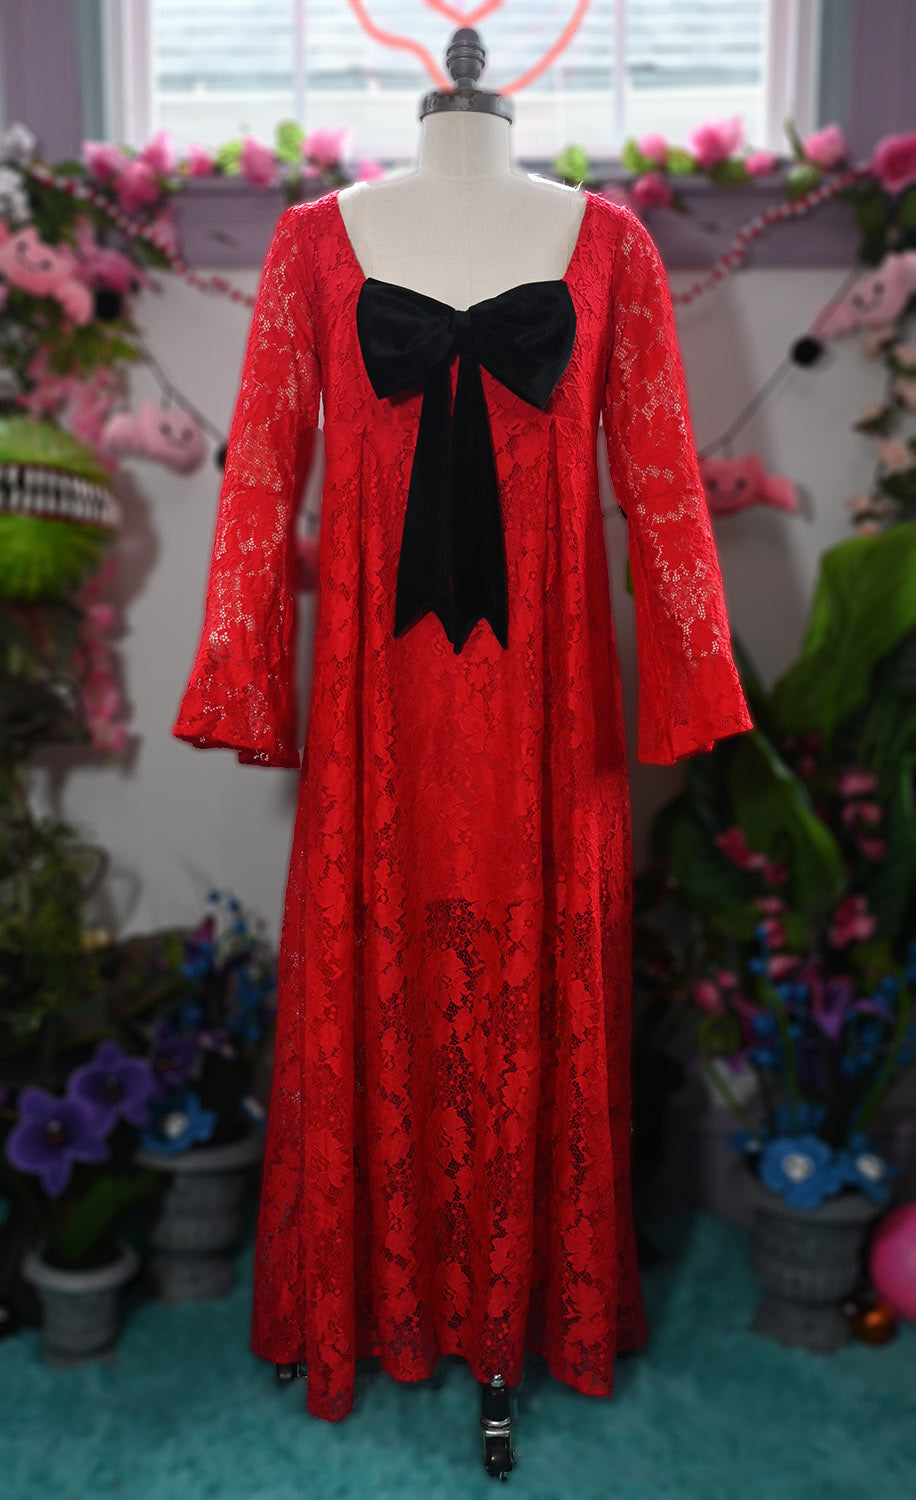 WAX POETIC Priscilla 60's Bell Sleeve Lace Maxi Dress in Red